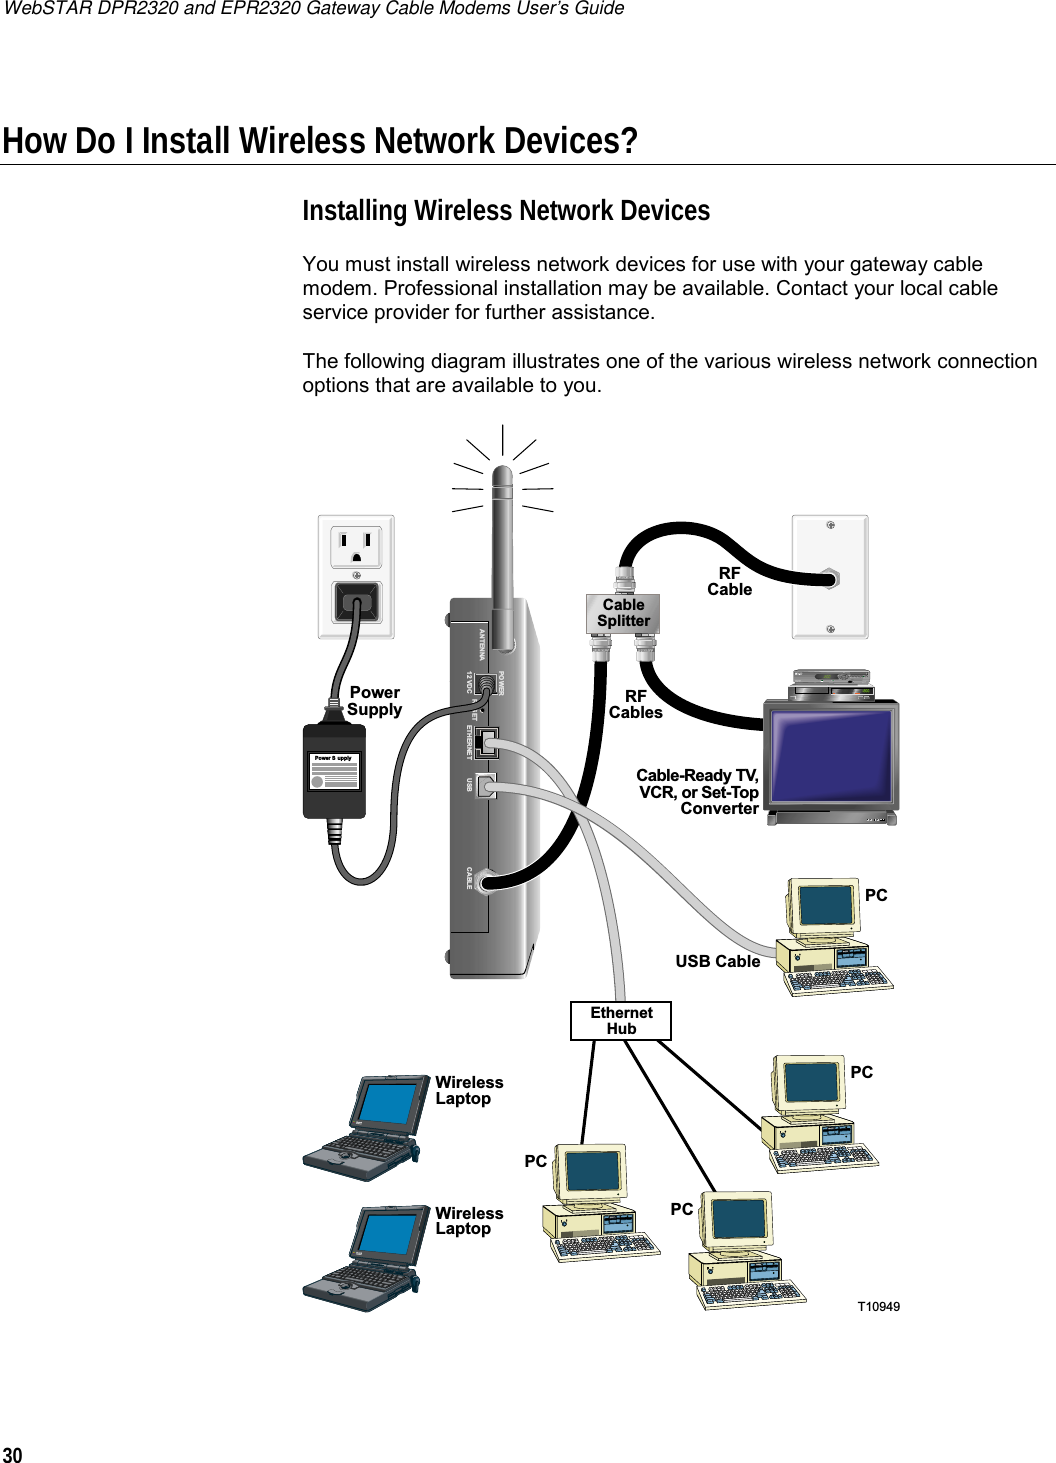 WebSTAR DPR2320 and EPR2320 Gateway Cable Modems User’s Guide 30  How Do I Install Wireless Network Devices? Installing Wireless Network Devices You must install wireless network devices for use with your gateway cable modem. Professional installation may be available. Contact your local cable service provider for further assistance. The following diagram illustrates one of the various wireless network connection options that are available to you. POWERANTENNA12 VDC RESET ETHERNET CABLEUSBPowerSupplyCable-Ready TV, VCR, or Set-TopConverterPCUSB CableRFCableRFCablesCable SplitterT10949Power SupplyBYPASSVOLñVOL+CH+CHñMENU GUIDE INFO A/B POWEREthernetHubPCPCWirelessLaptopPCWirelessLaptop   